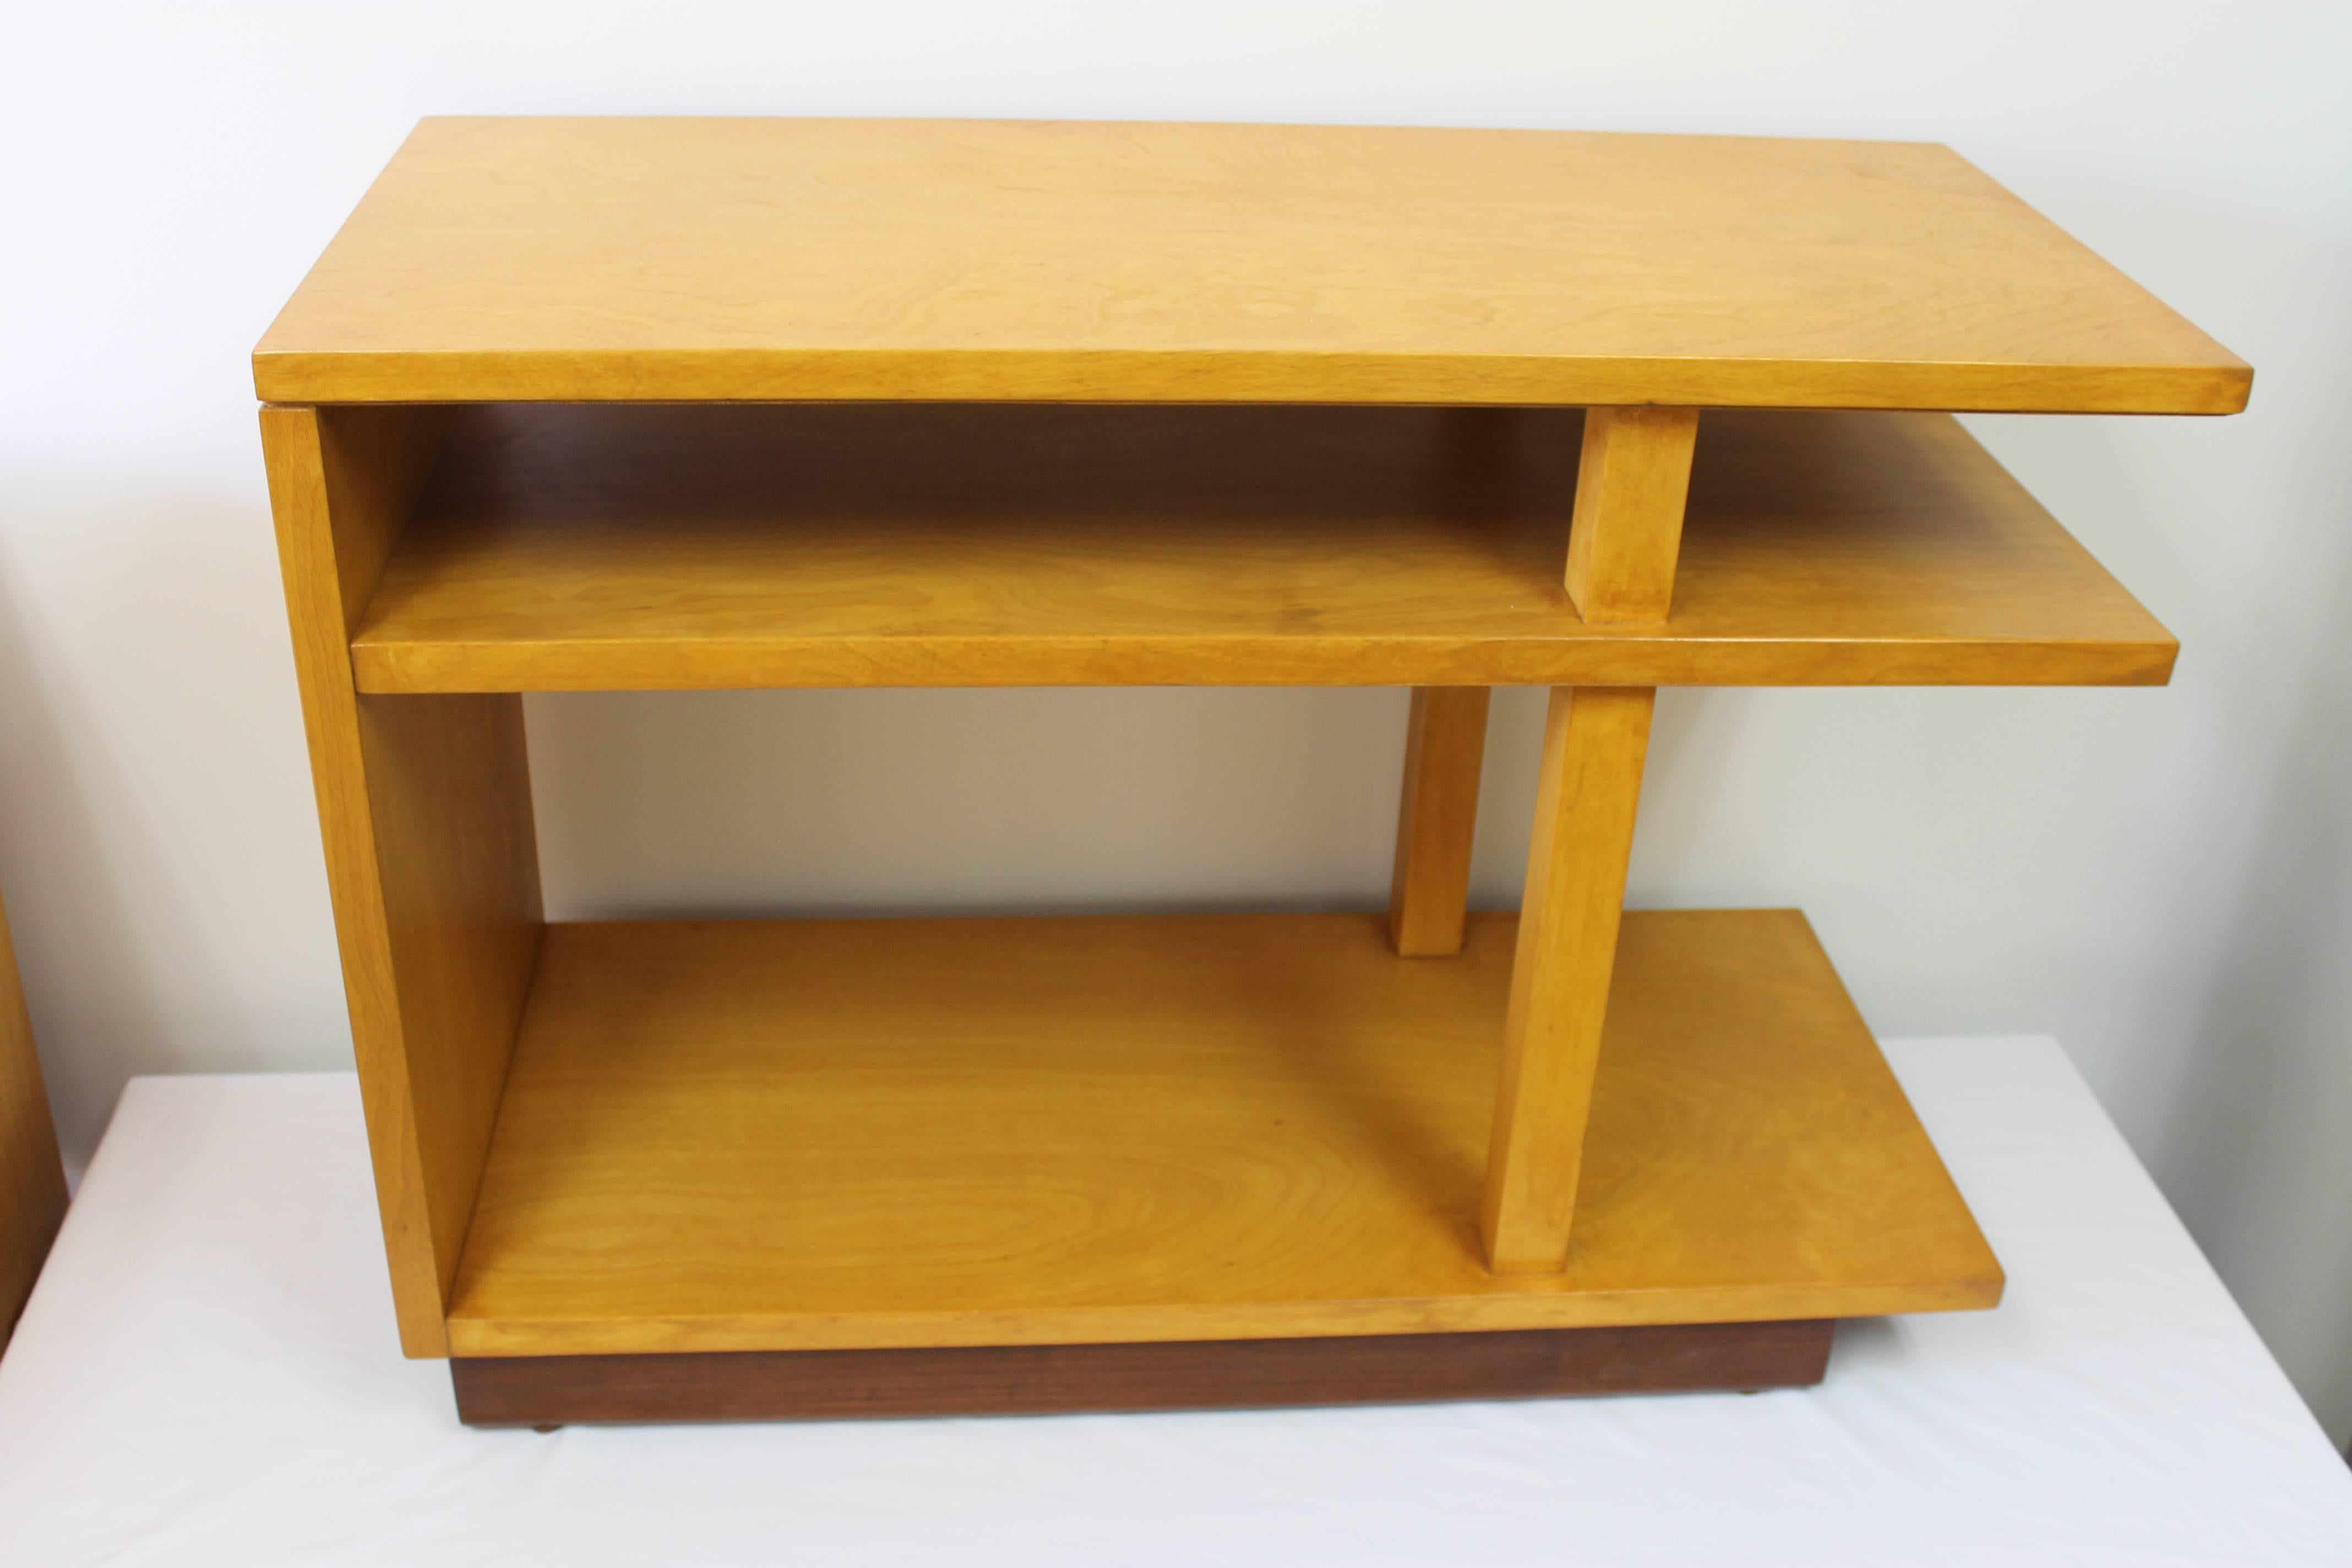 Three-tier end table by Eliel Saarinen and Pipsan Saarinen Swanson for the Johnson Furniture Co. Measures 31.5